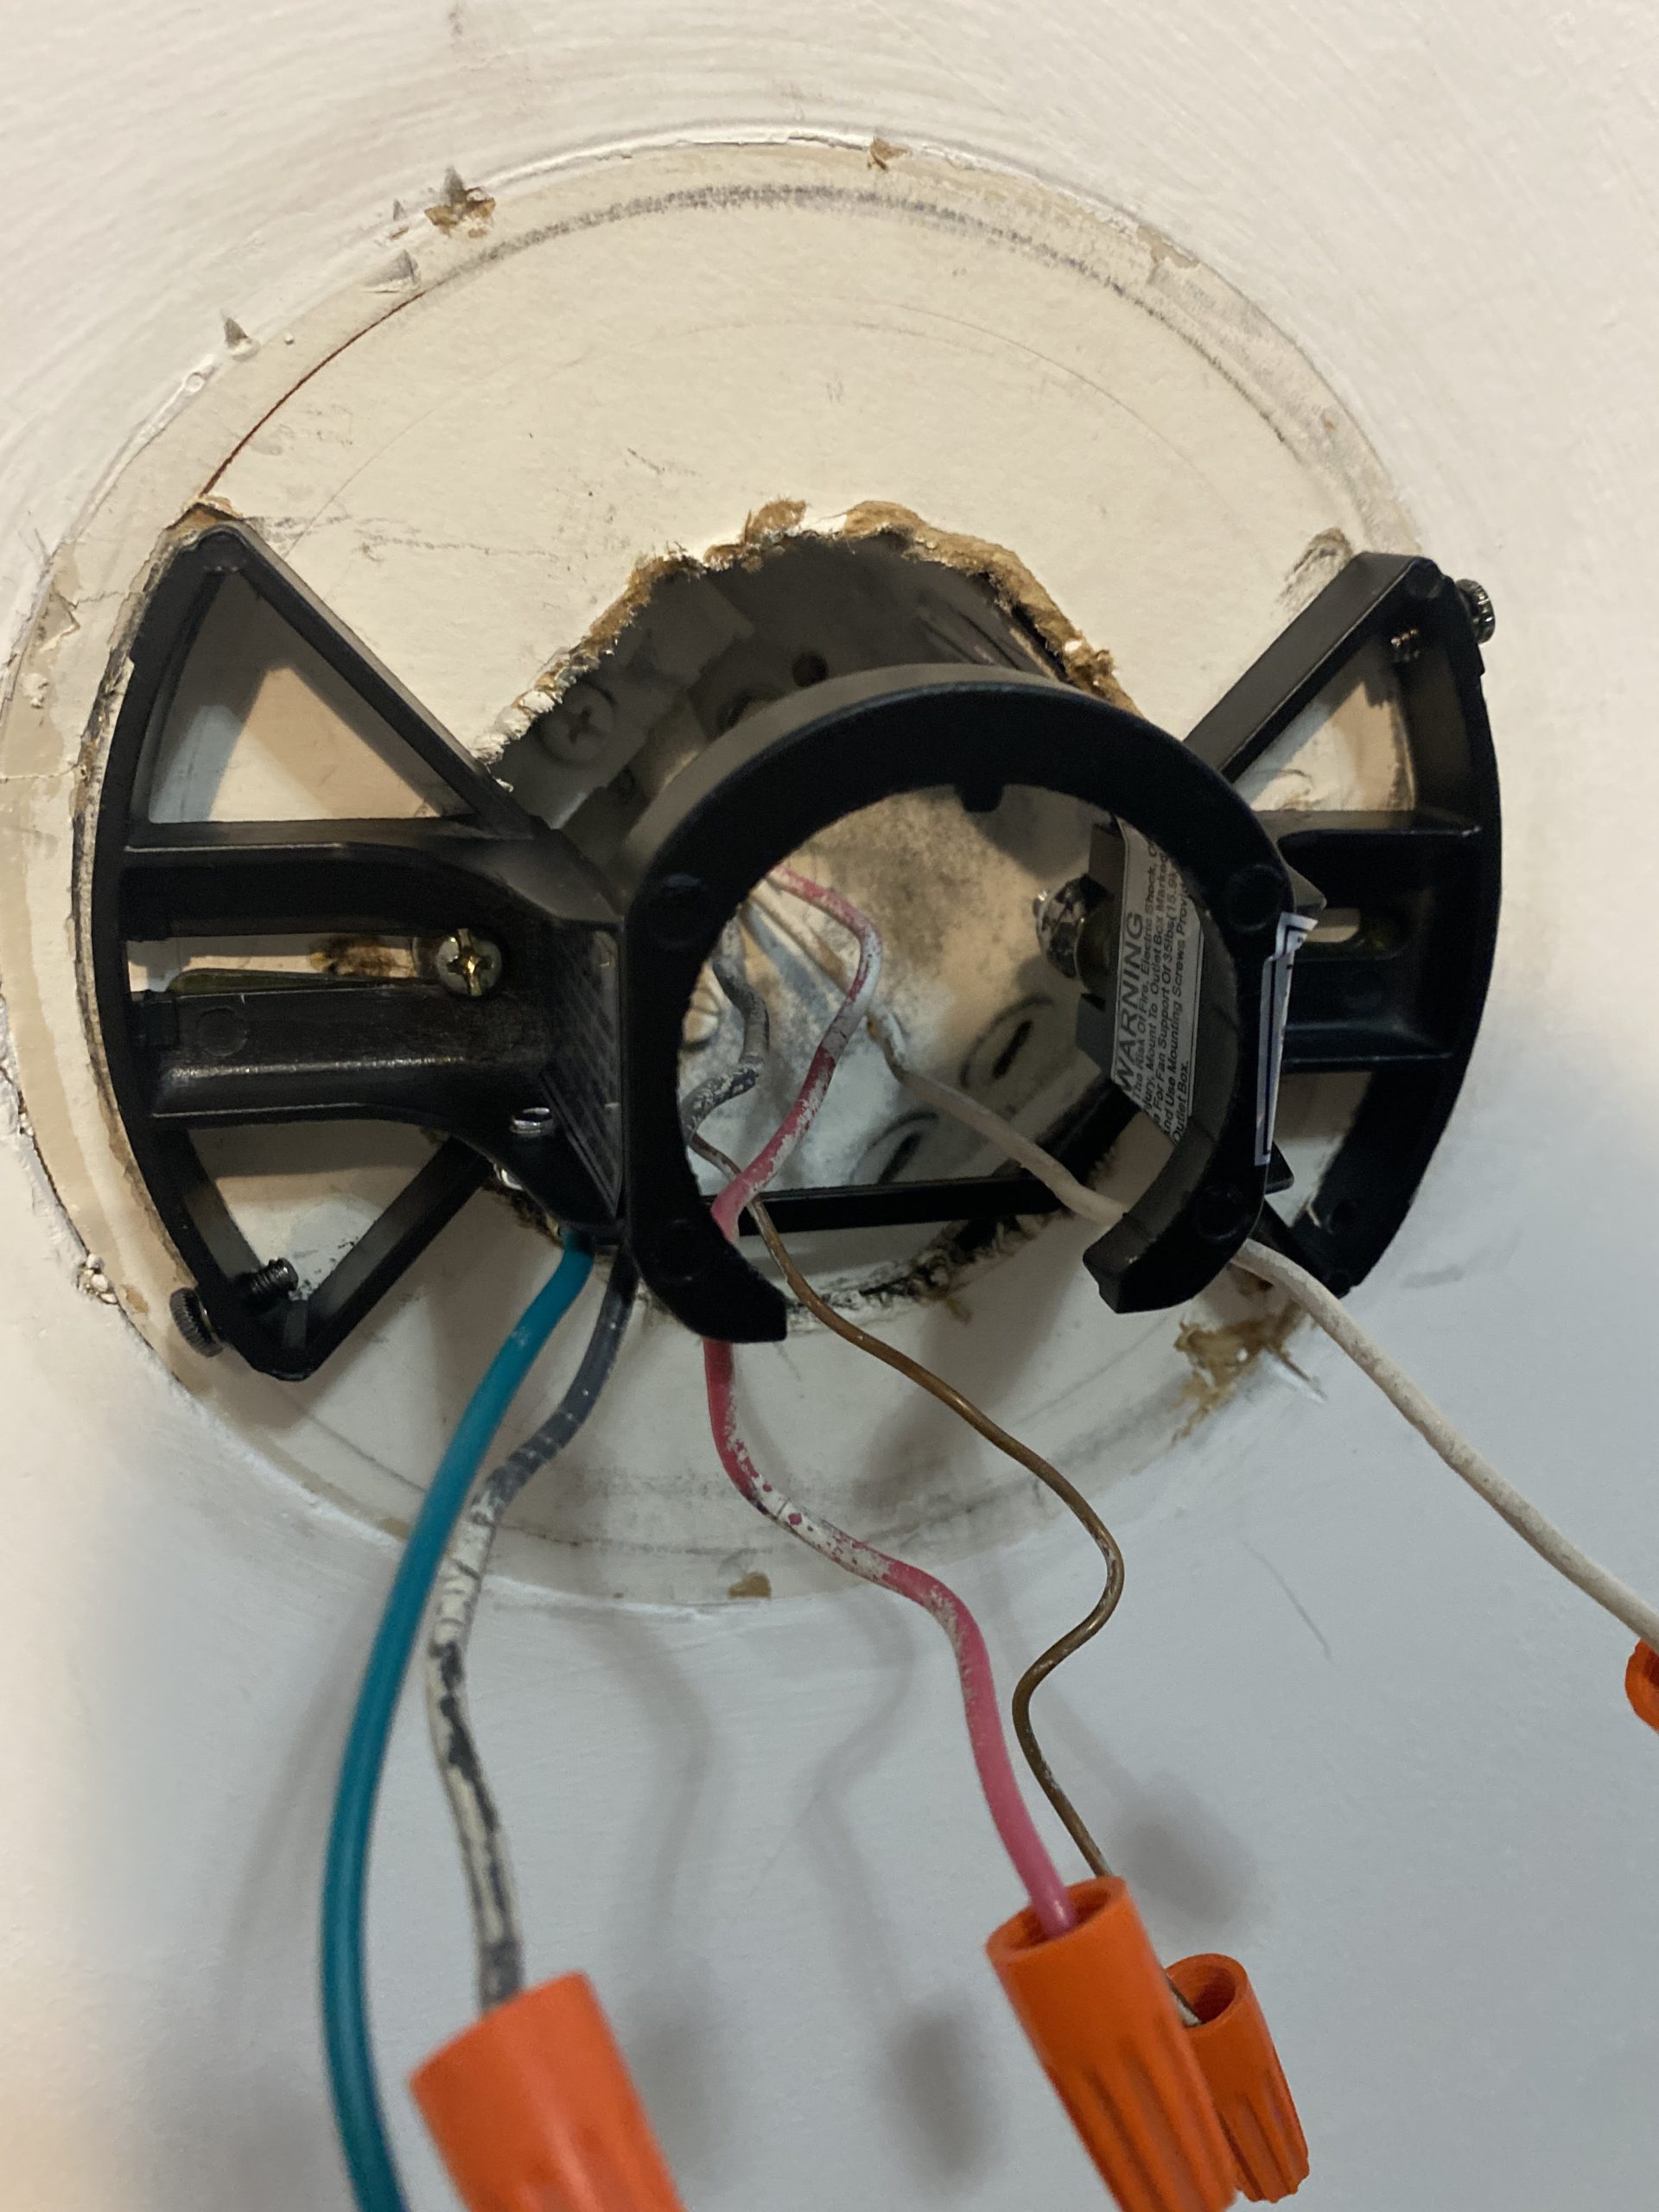 Ceiling Electrical Box that supports a ceiling fan on two wall switches.